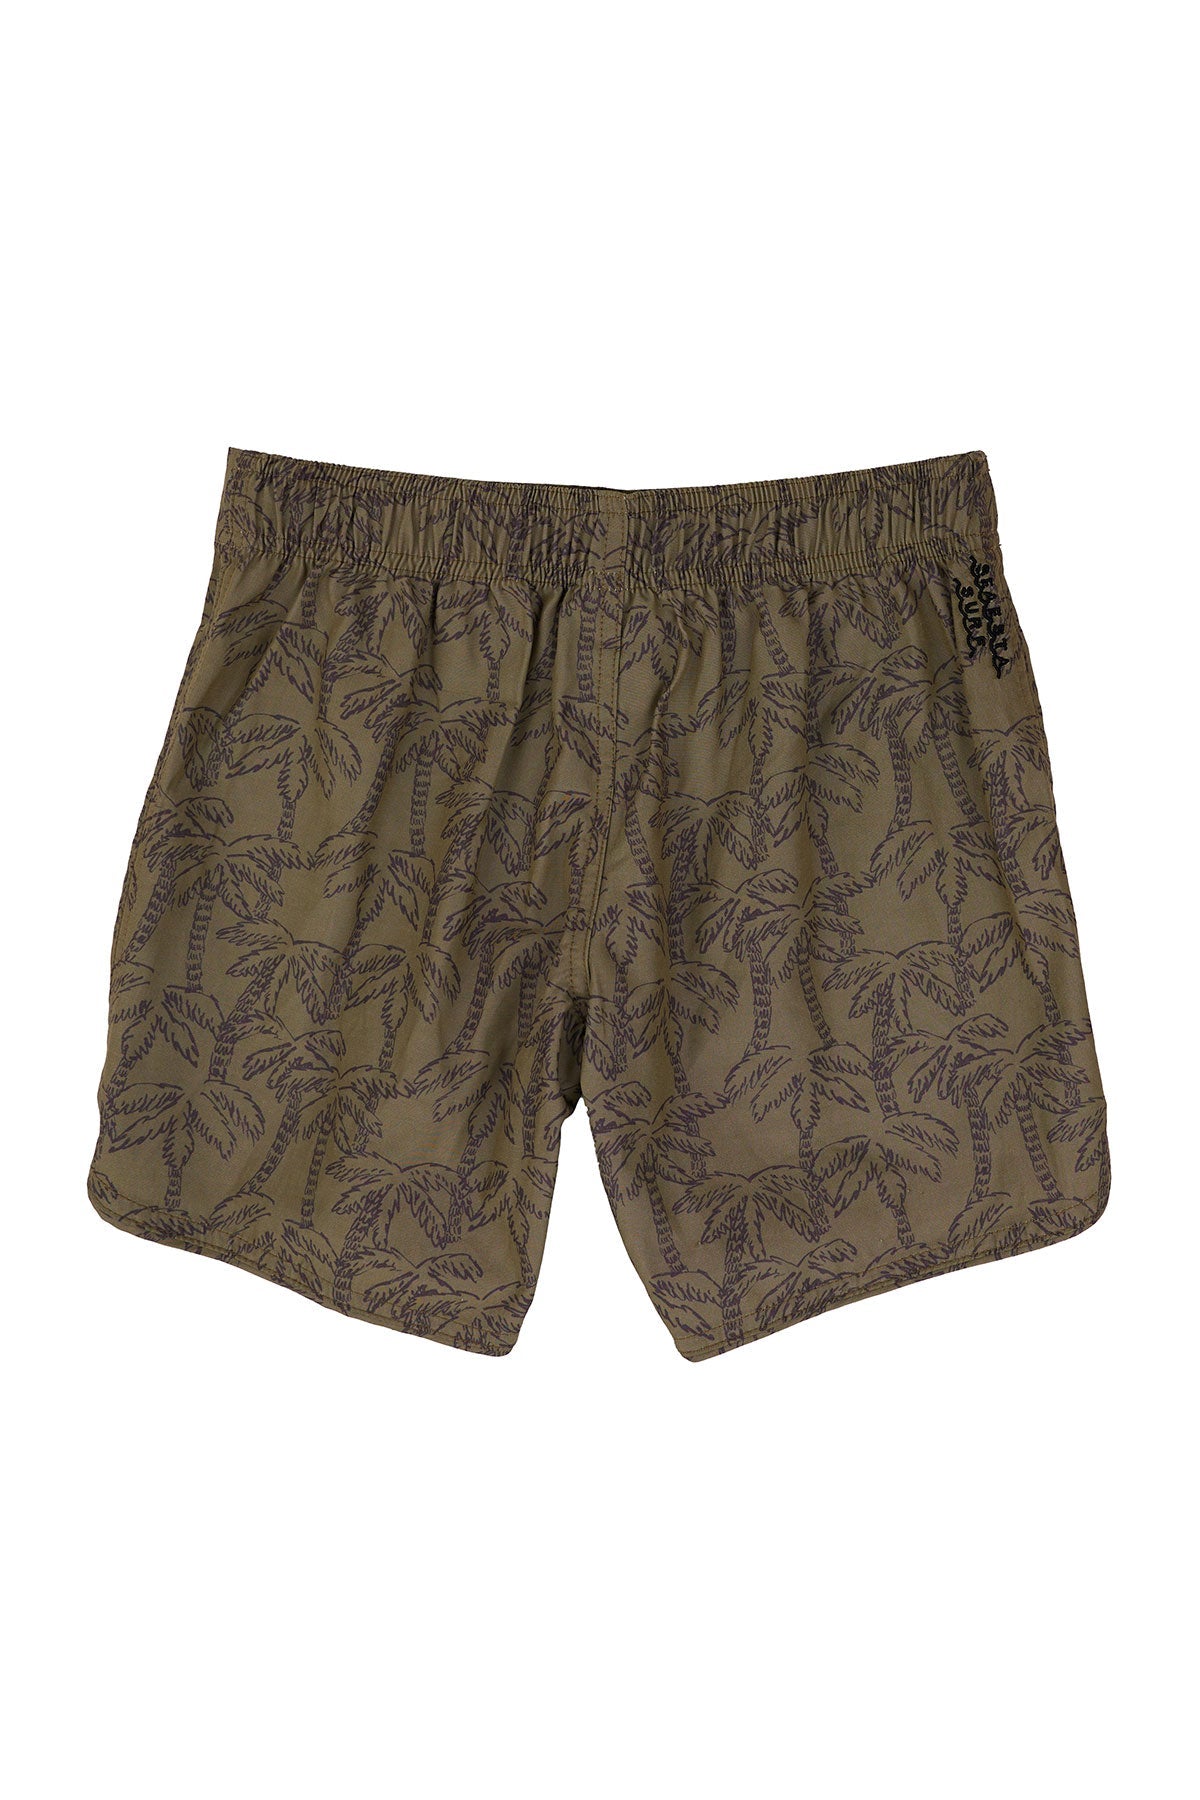 Custom, hand-drawn palm tree print made exclusively for Seaesta Surf. These boardshorts are earth and performance conscious, featuring eco-friendly fabrics and signature vintage-inspired boardshort design with a scalloped retro boardshort hem.